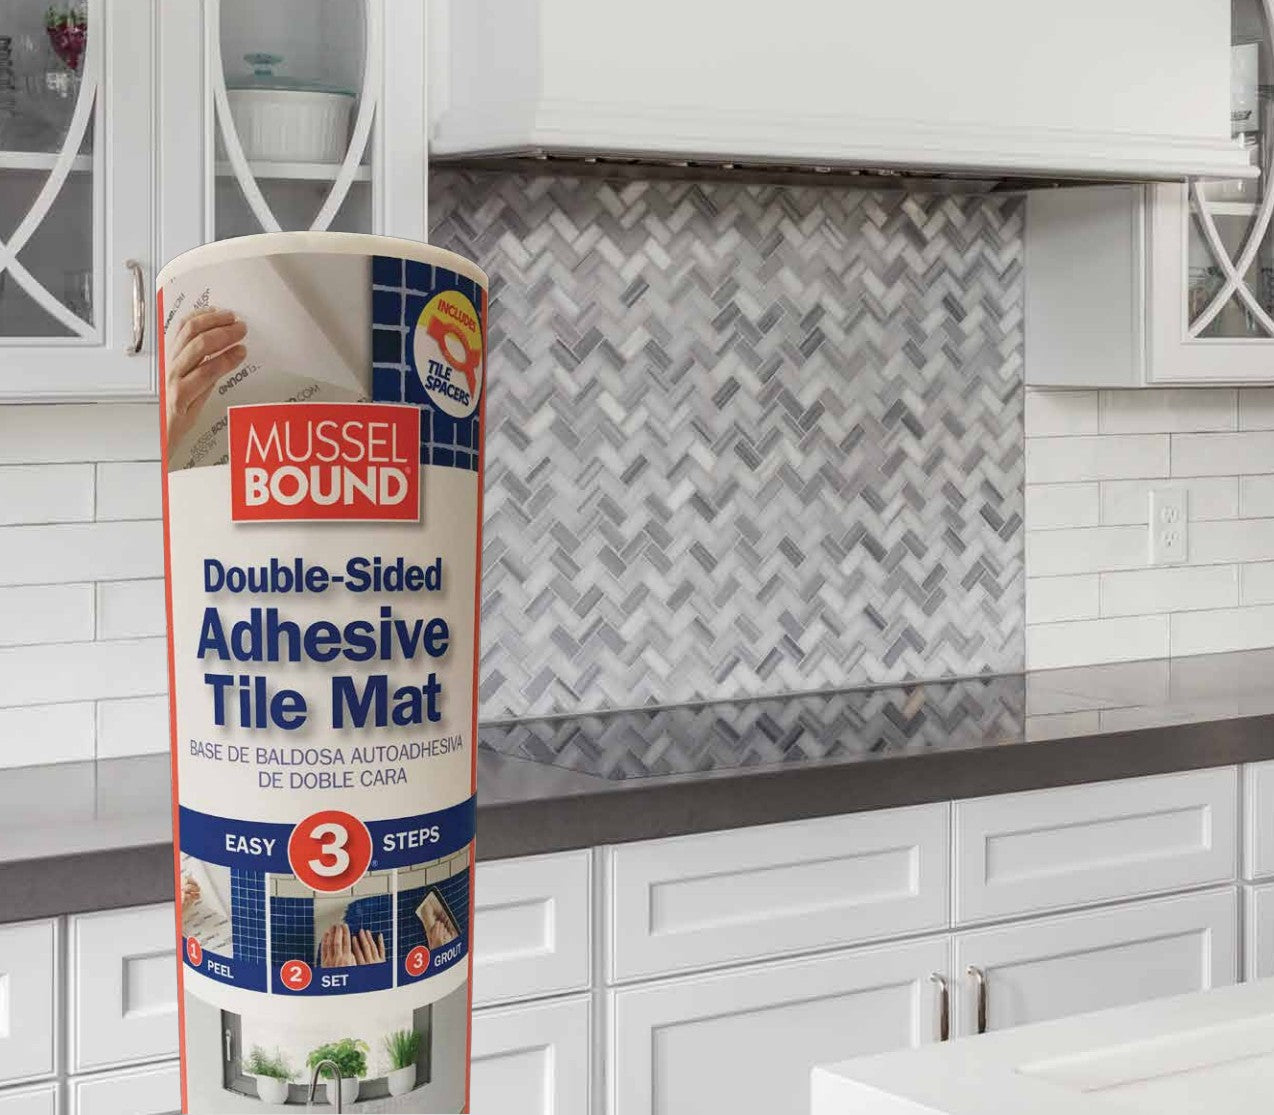 Testing Musselbound tile adhesive with HEAVY marble tile- part 1